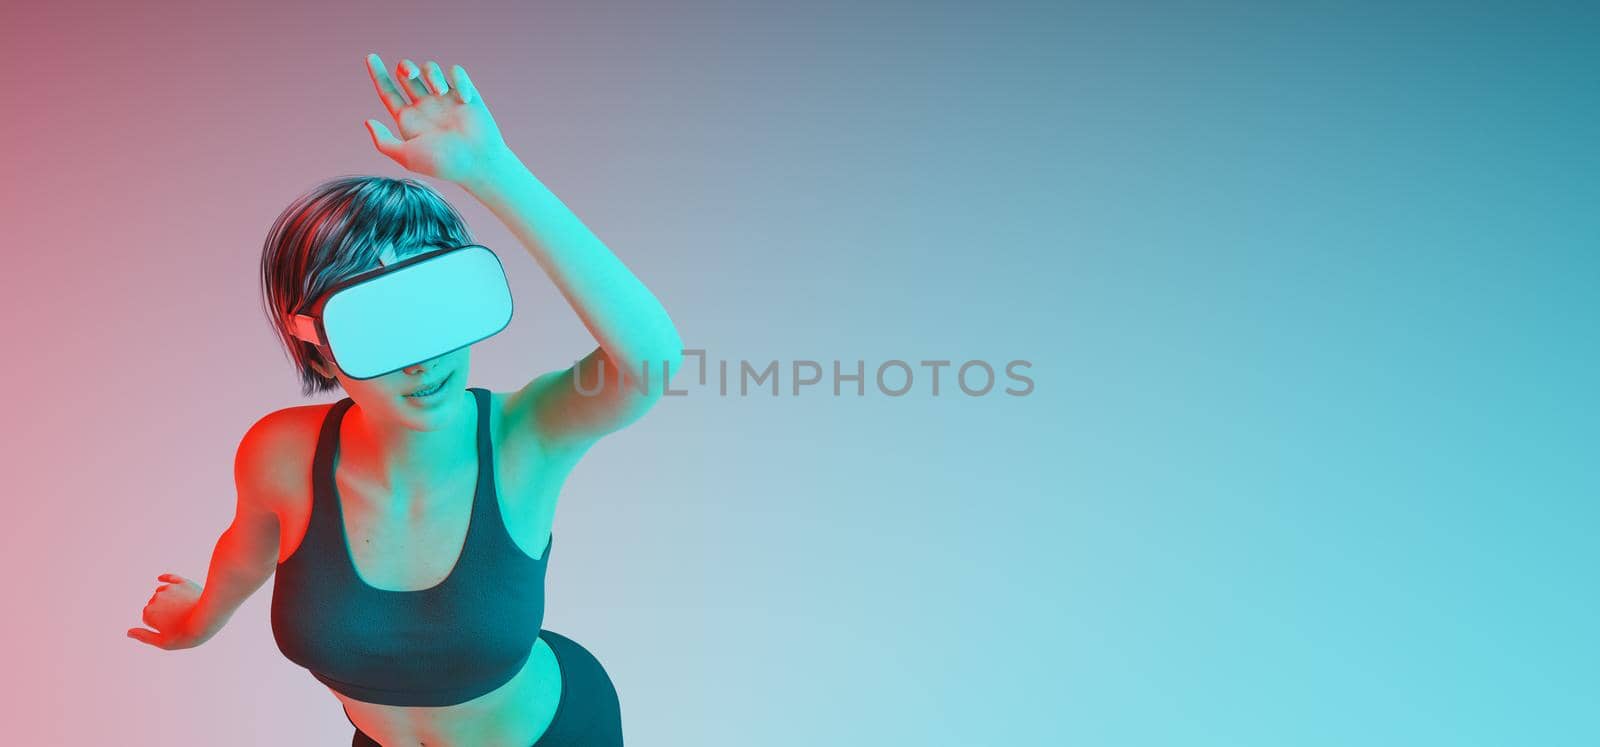 caucasian girl dancing and enjoying herself with a virtual reality goggles by asolano